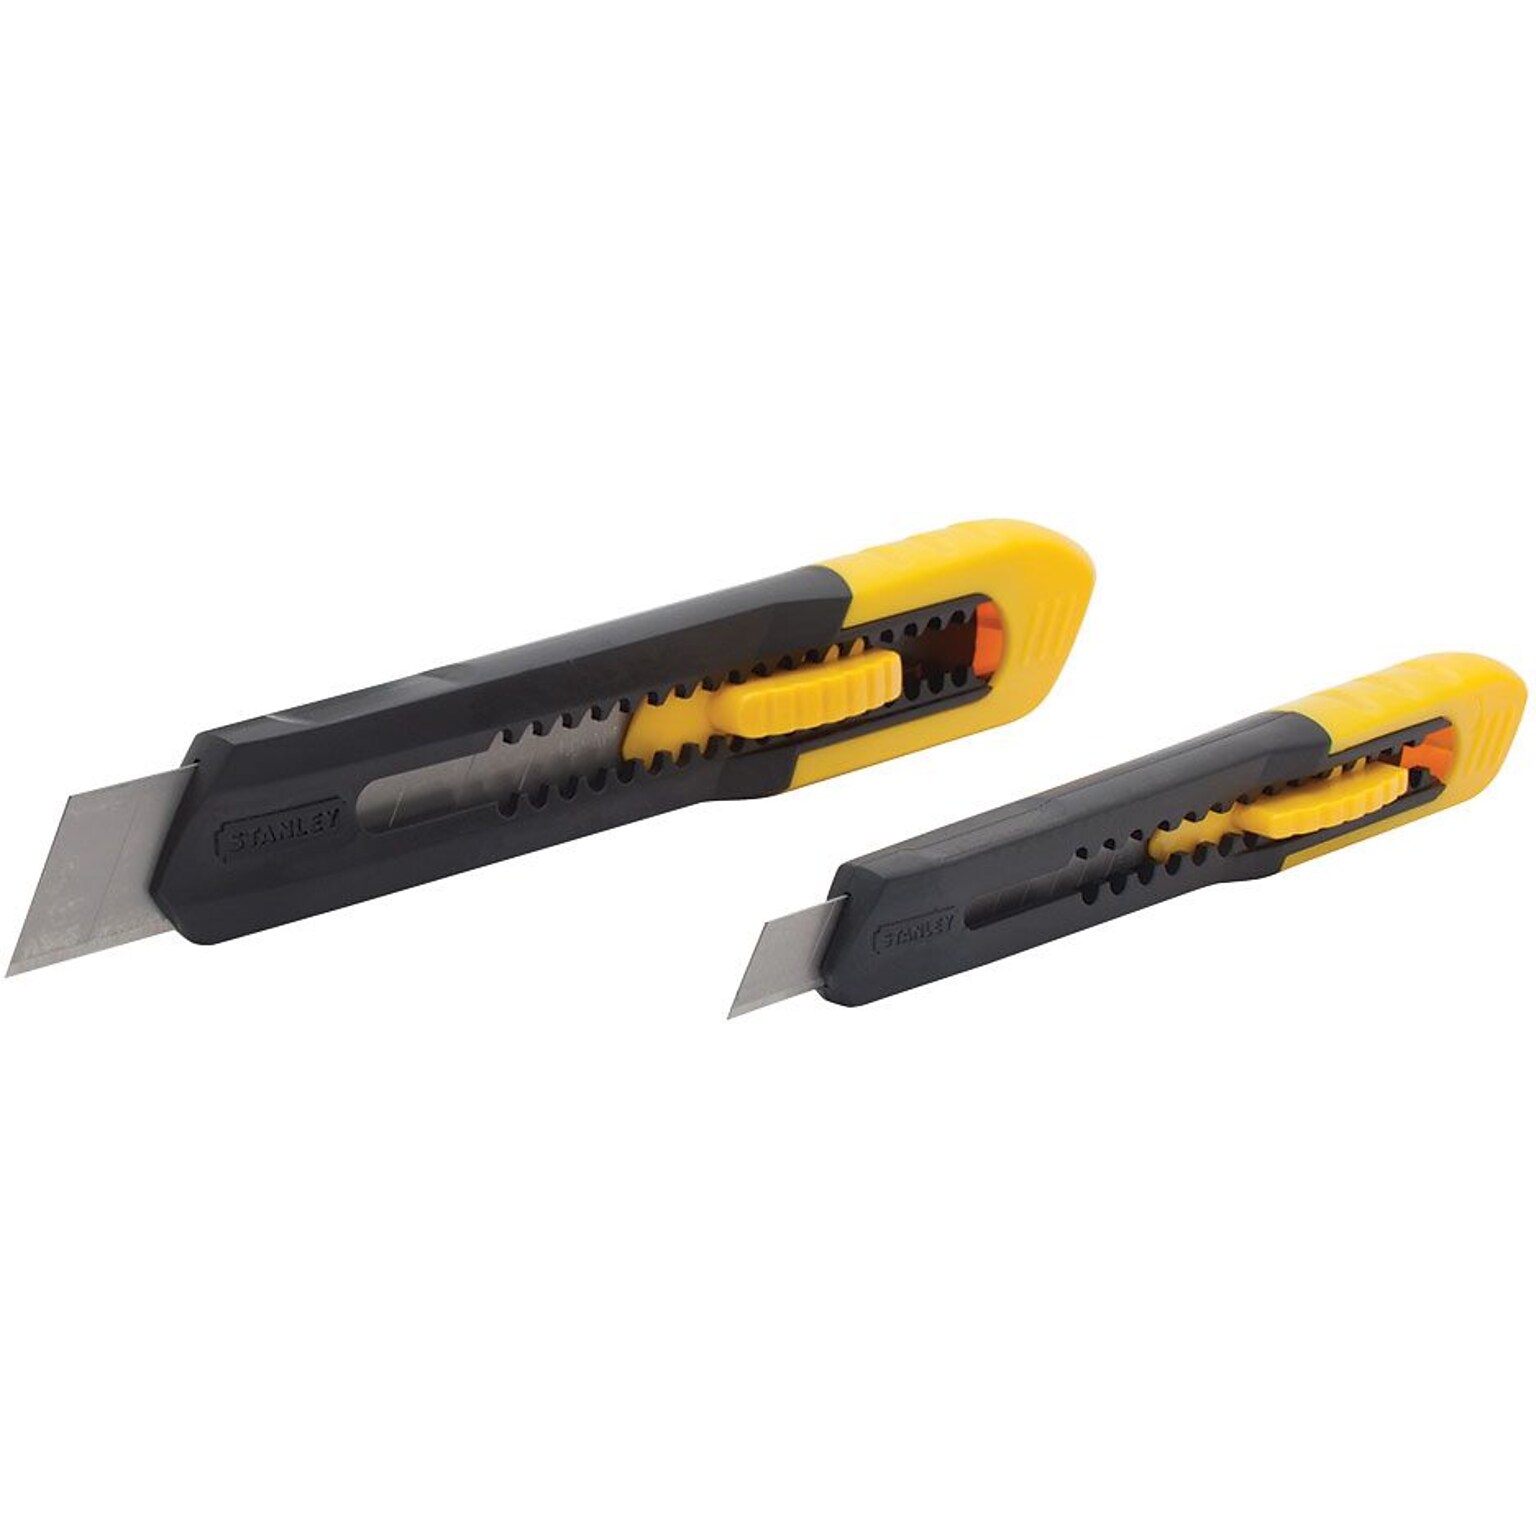 Stanley Quick Point Snap Off Blade Utility Knife, 2 Pack (10-202)